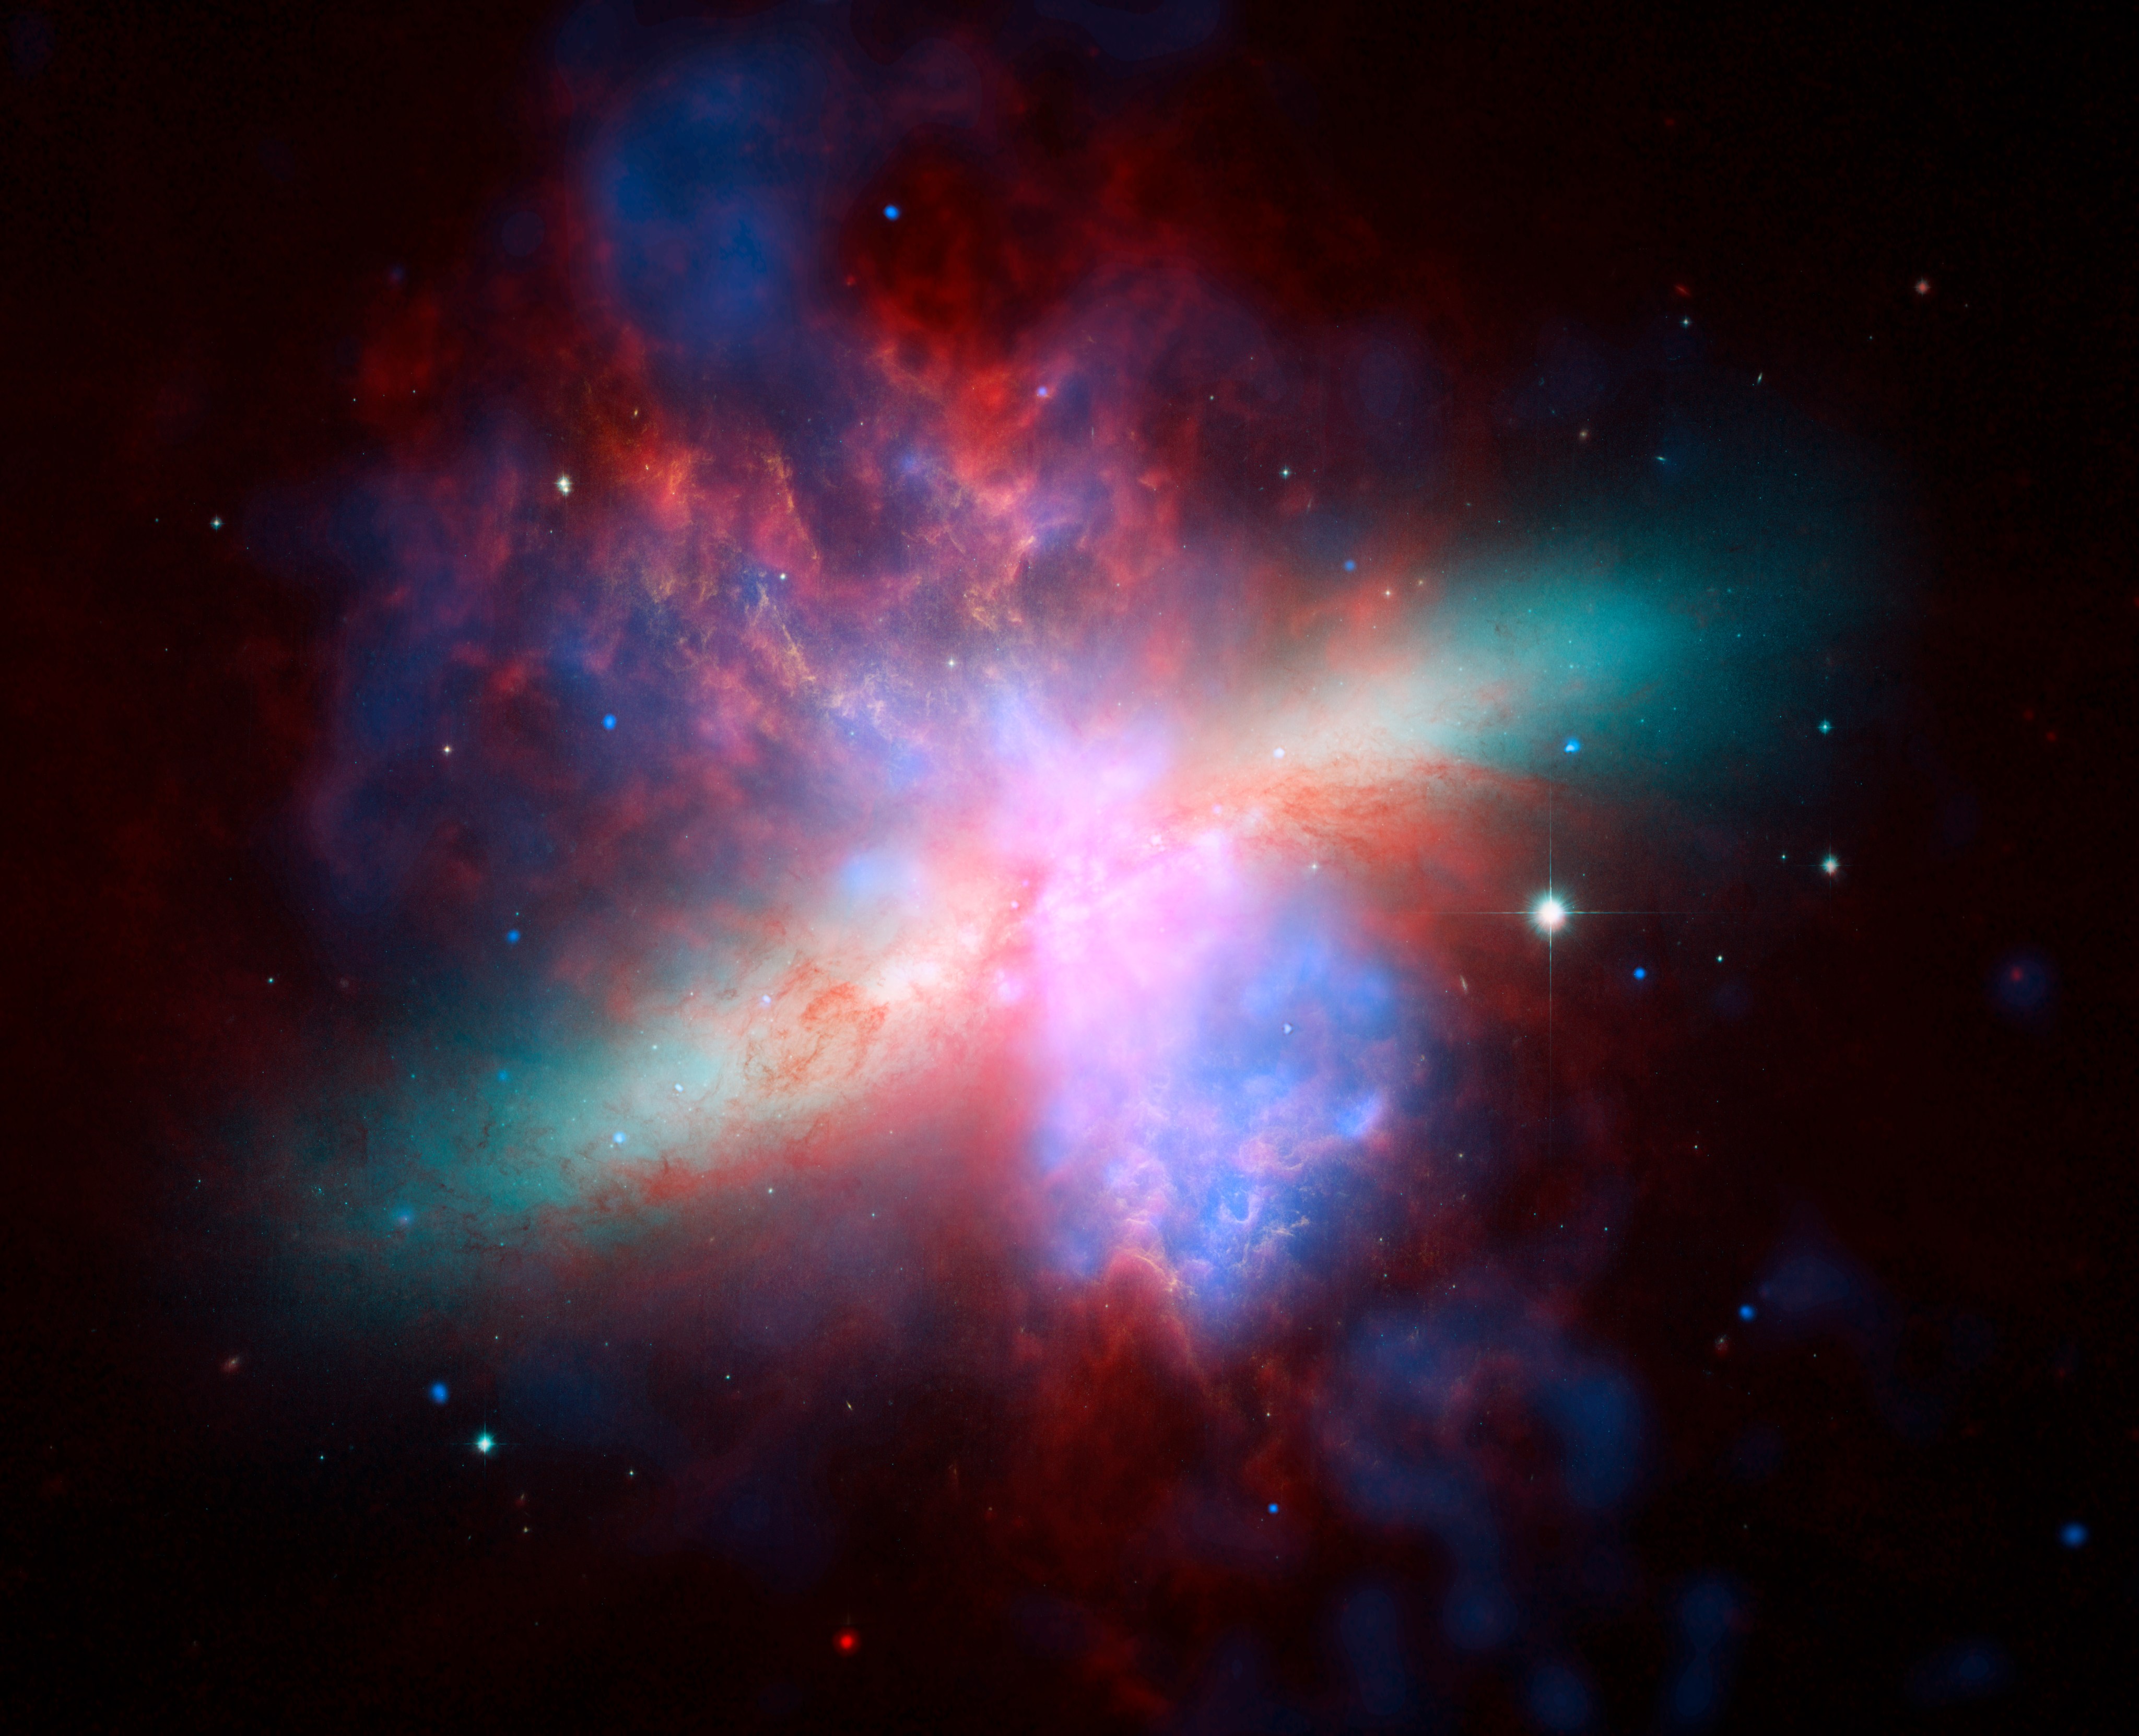 NASA's Spitzer, Hubble, and Chandra space observatories teamed up to create this multi-wavelength view of the M82 galaxy. The lively portrait celebrates Hubble's "sweet sixteen" birthday.X-ray data recorded by Chandra appears in blue; infrared light recorded by Spitzer appears in red; Hubble's observations of hydrogen emission appear in orange, and the bluest visible light appears in yellow-green.